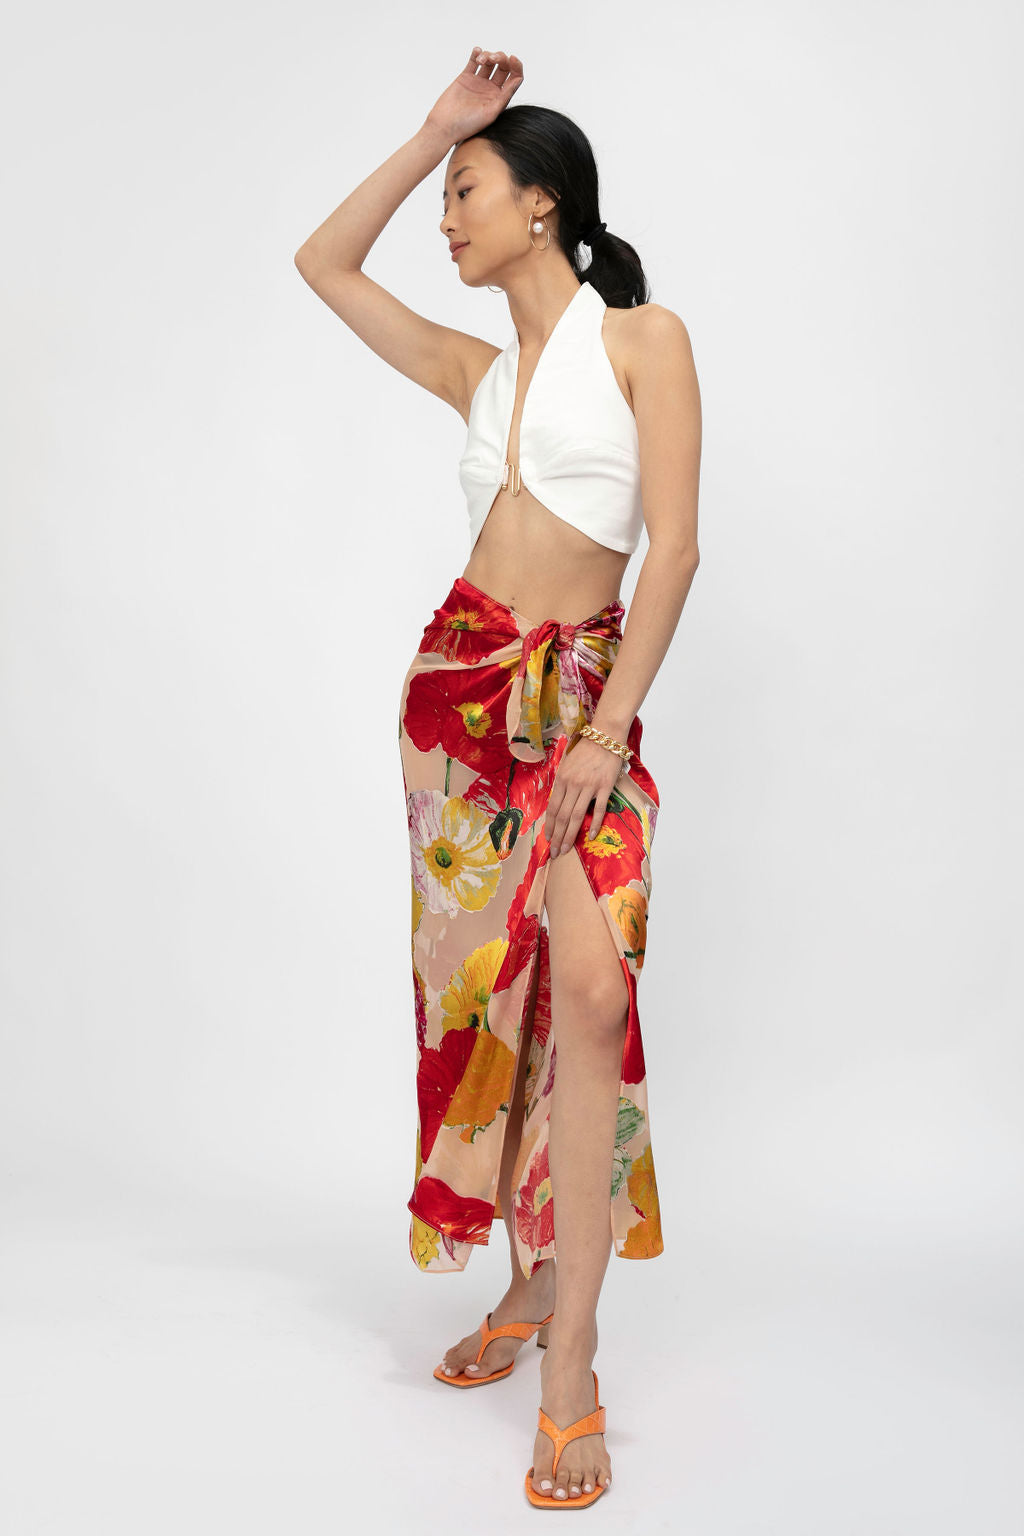 CULT GAIA Nila Skirt Coverup in Painted Floral